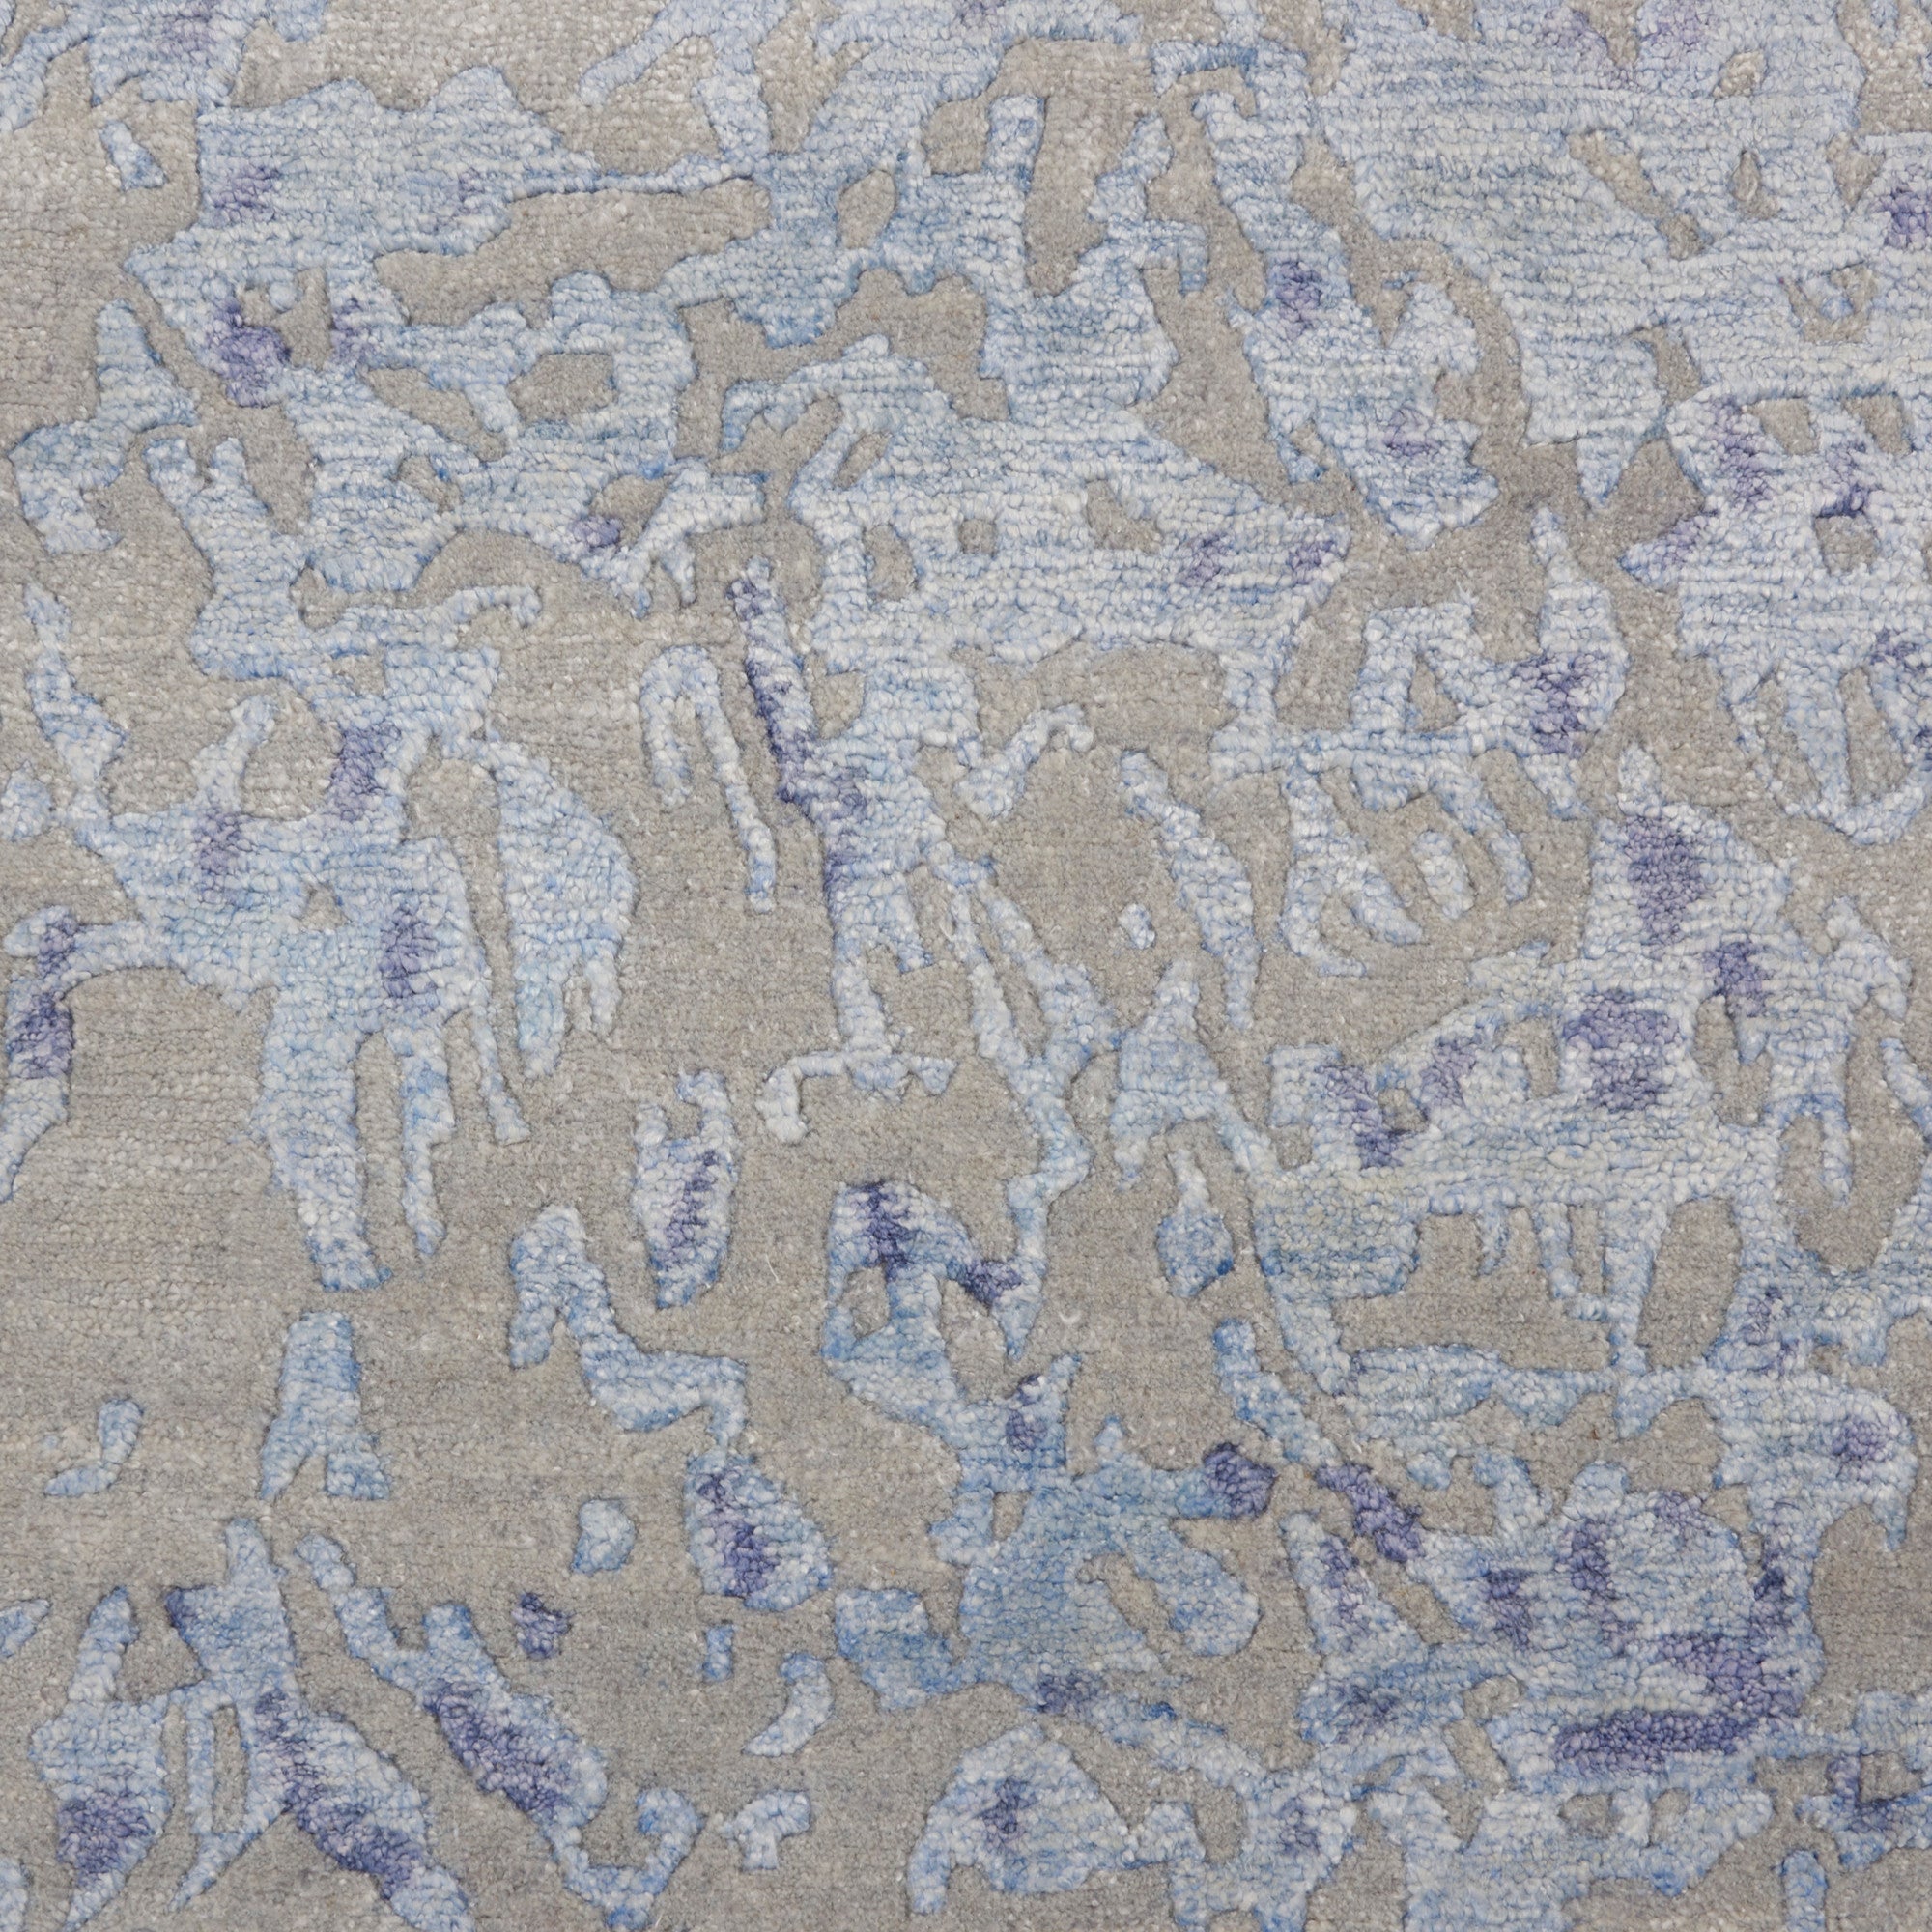 Close-up view of a textured fabric with intricate blue patterns.